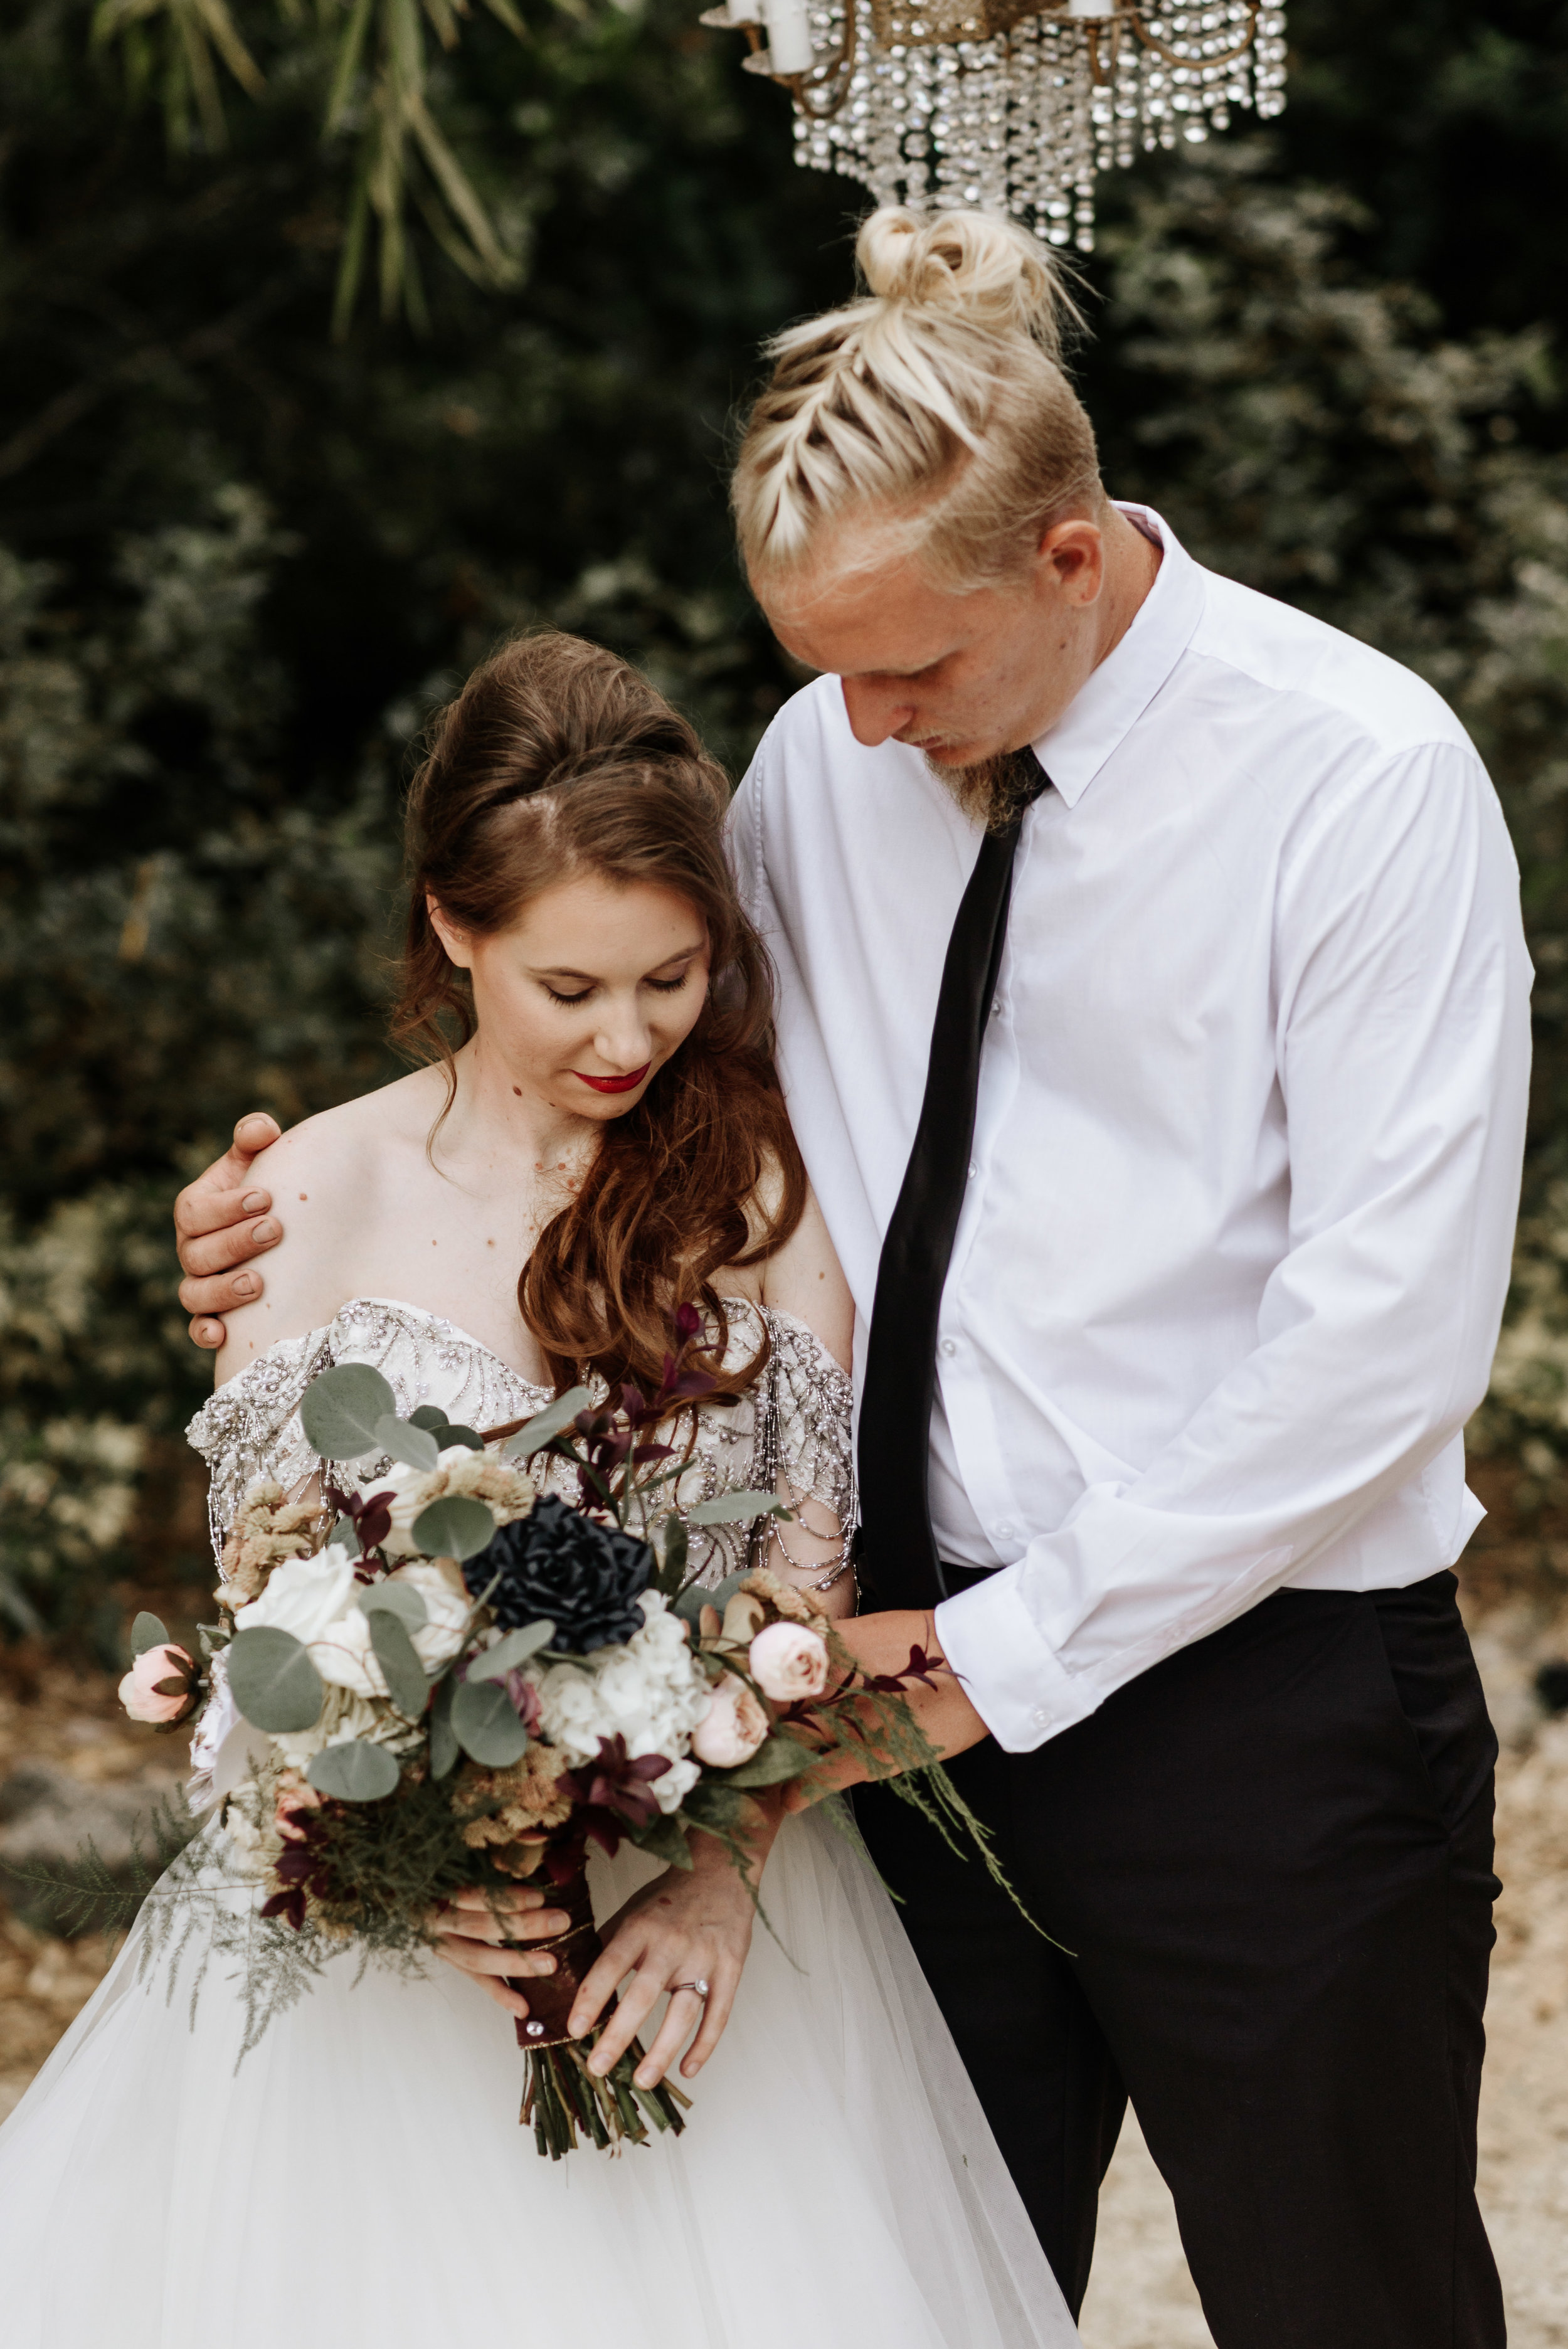 Grant-Station-Styled-Shoot-Whimsical-Moody-Fairytale-Wedding-Photography-by-V-9713.jpg